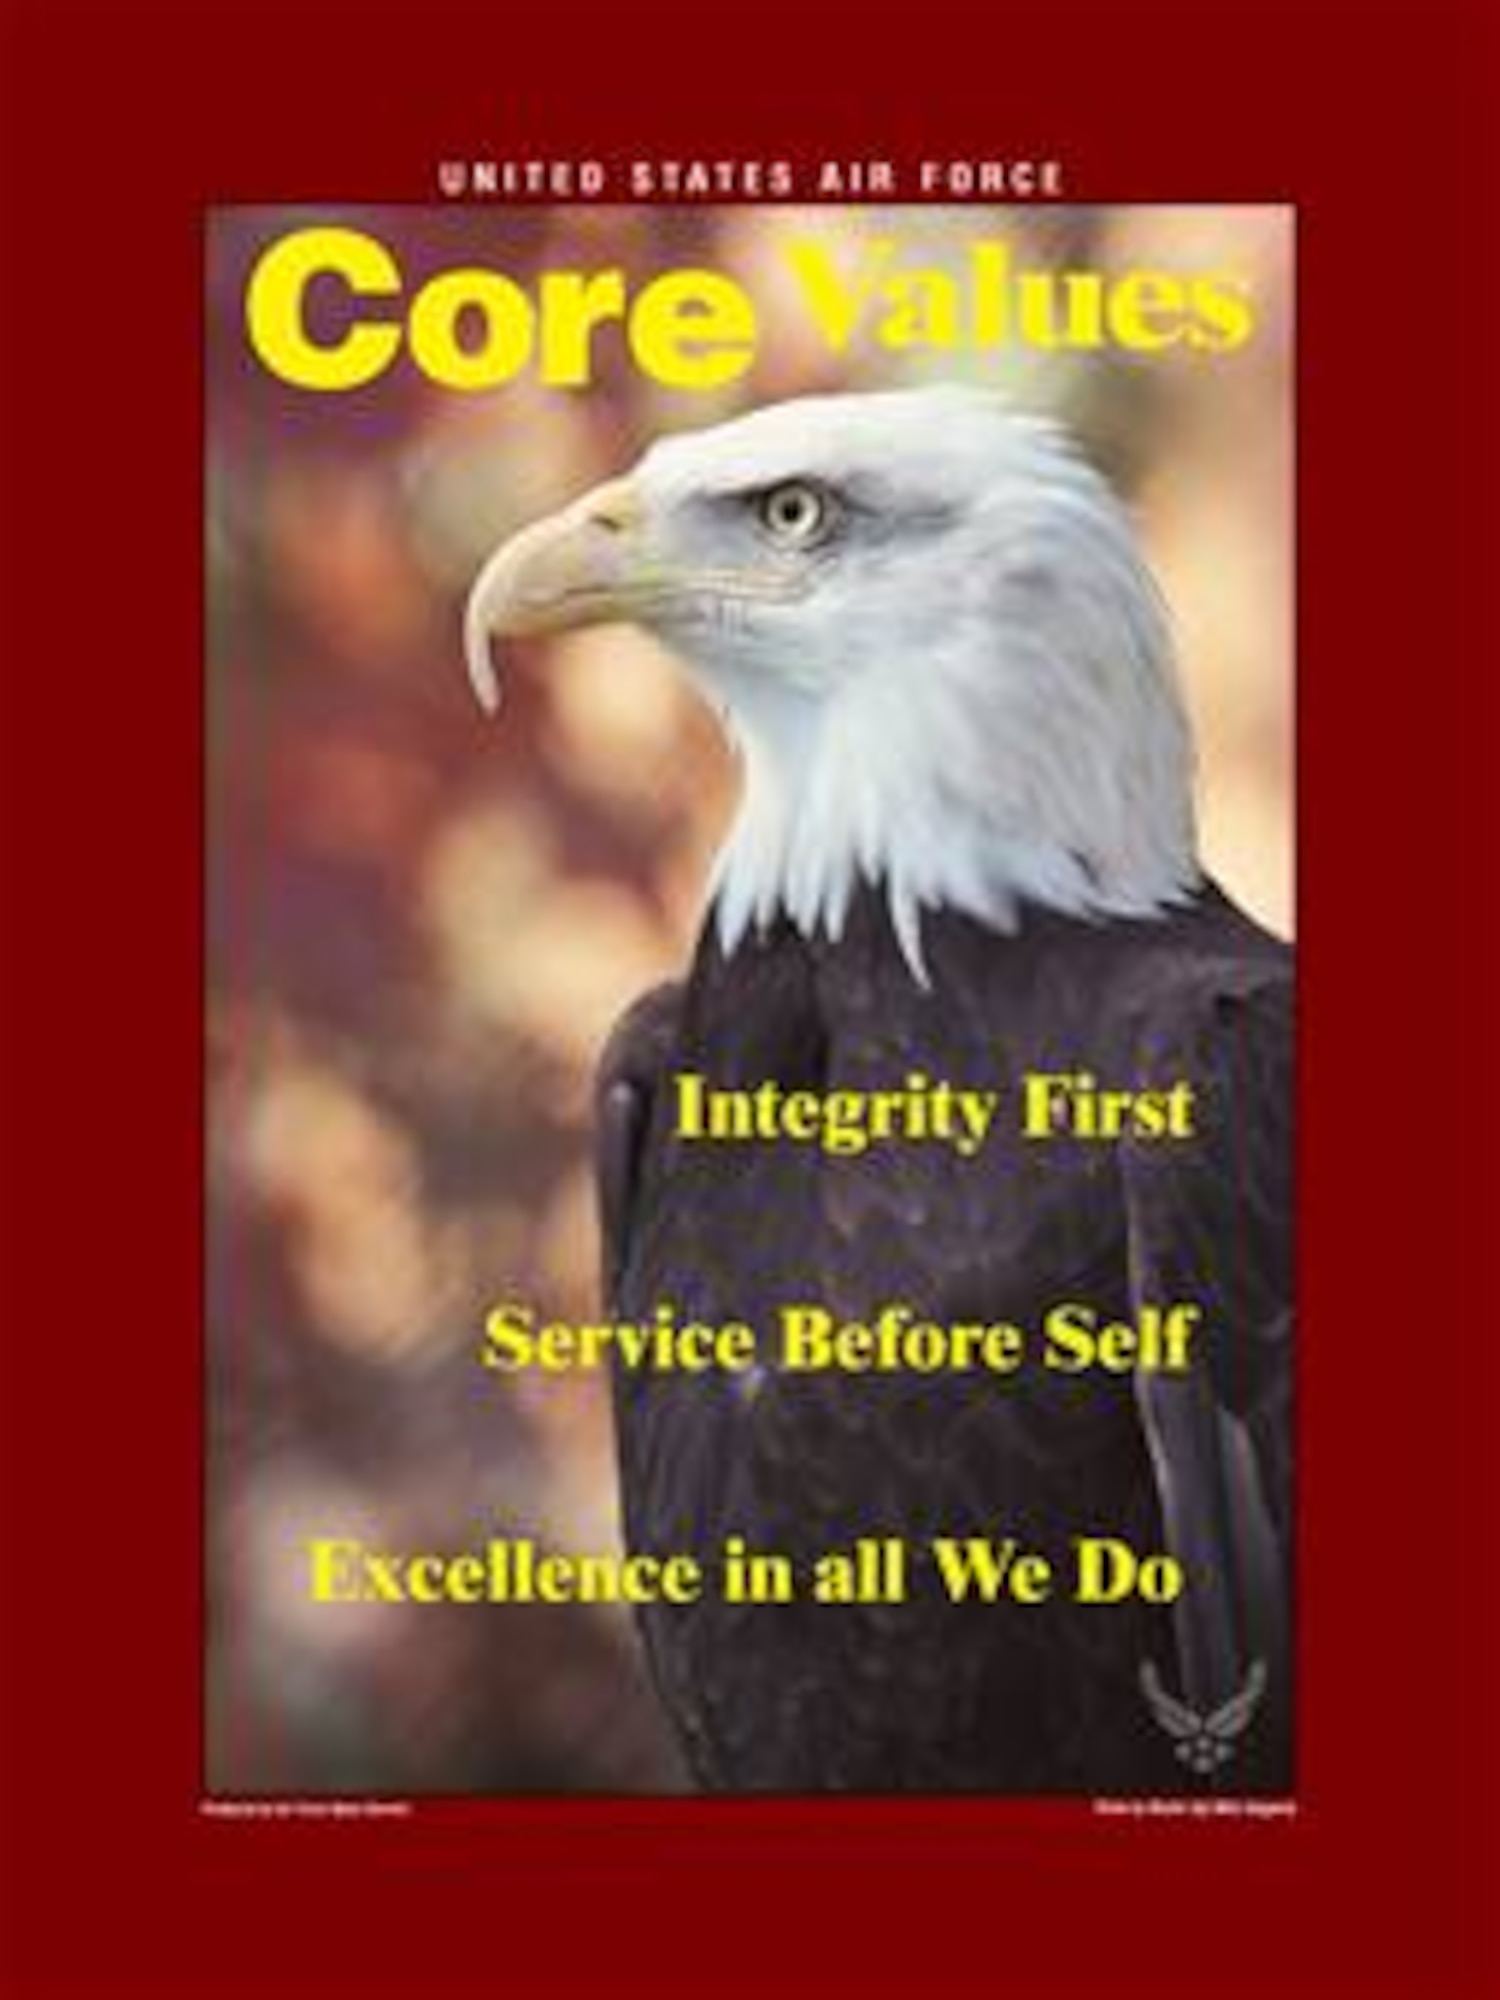 Core Values Poster, 8.25x11 inches, 300 ppi.  This poster was created by the Air Force News Agency. The image for this poster is available up to 18x24 inches at 300 ppi and can be provided in any format required for reproduction or duplication upon request. Air force Link does not provide printed posters but assistance can be provided in acquiring posters through your servicing DAPS.  A PDF version for printing on office printers is also available.  Requests can be made to afgraphics@dma.mil. Please specify the title and number.